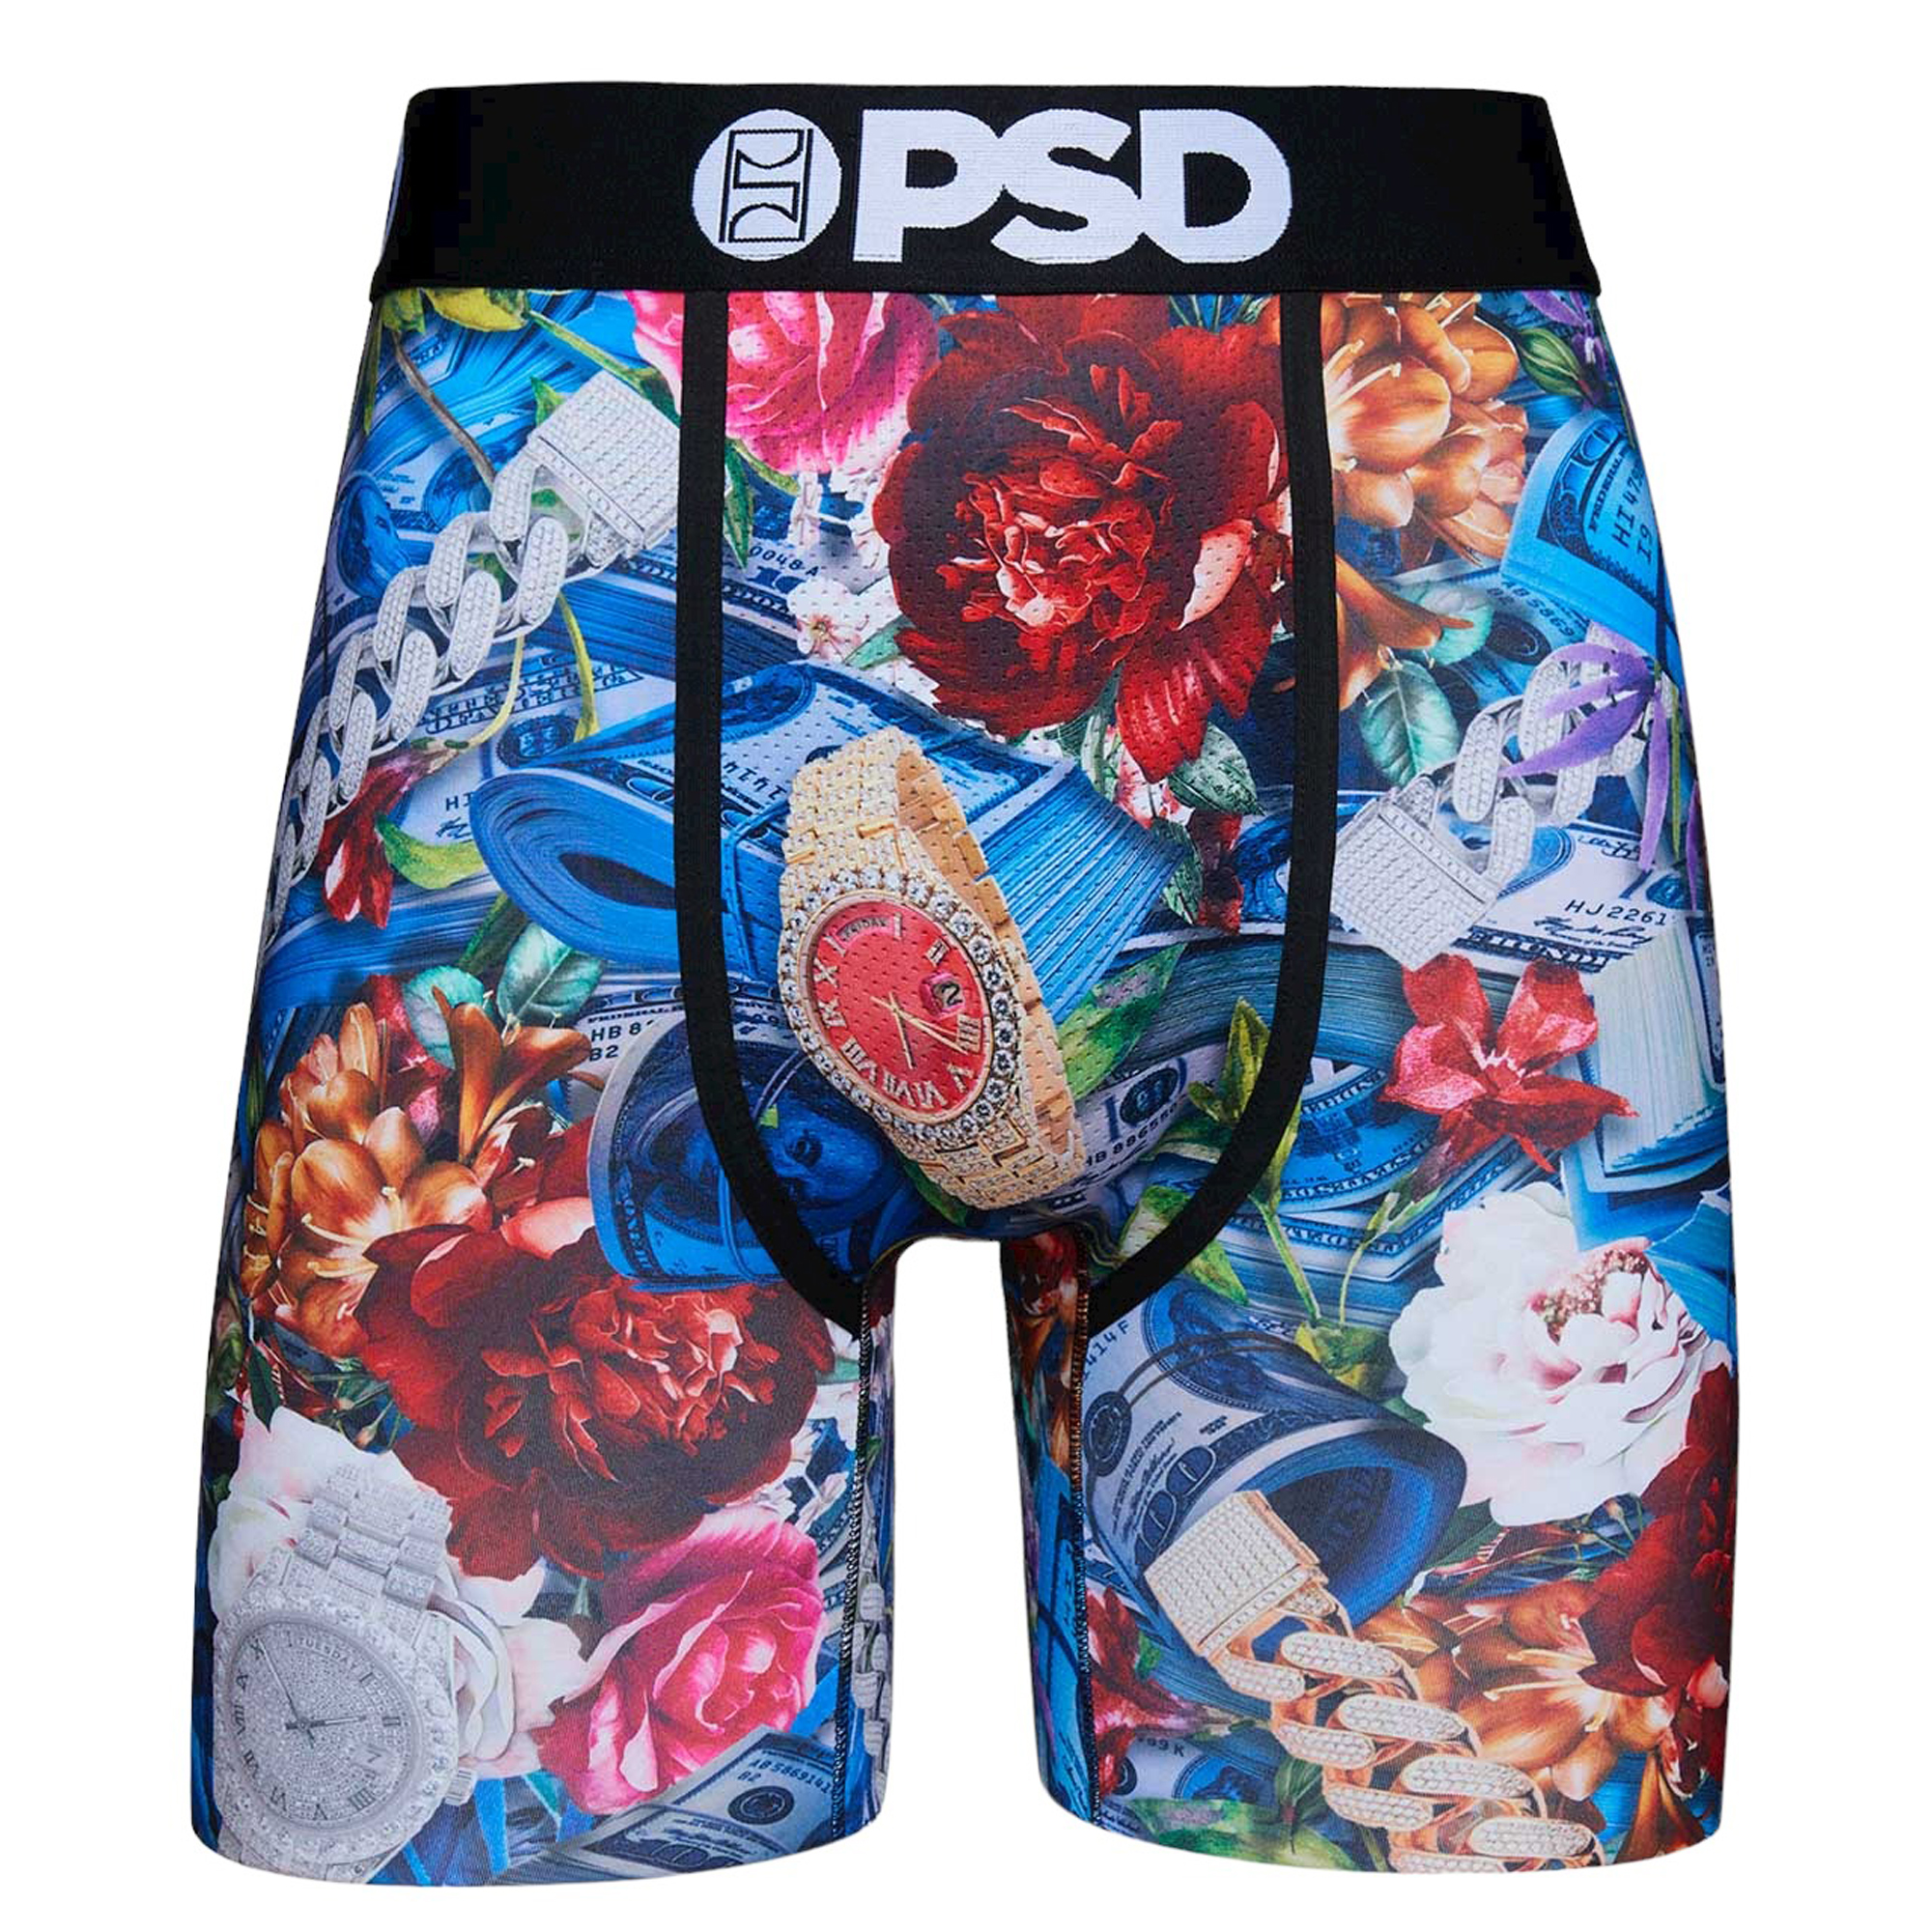 PSD Monogram Luxe 3 Pack Boxer Briefs - Multi-Colored - Large